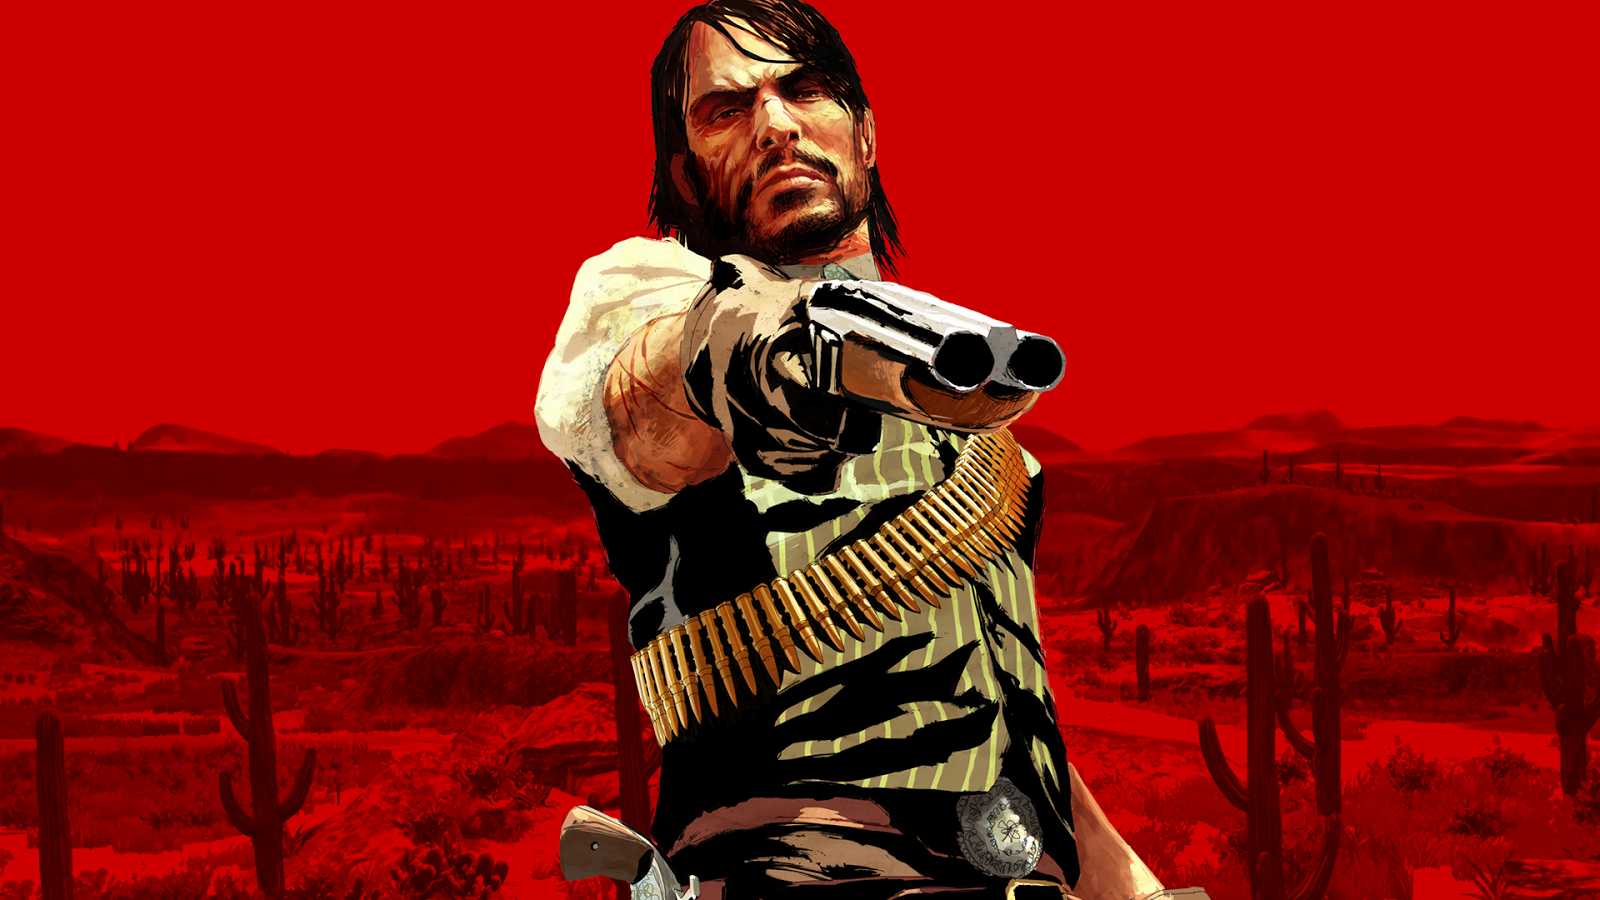 Game Wallpapers: Red Dead Redemption  Game Wallpaper